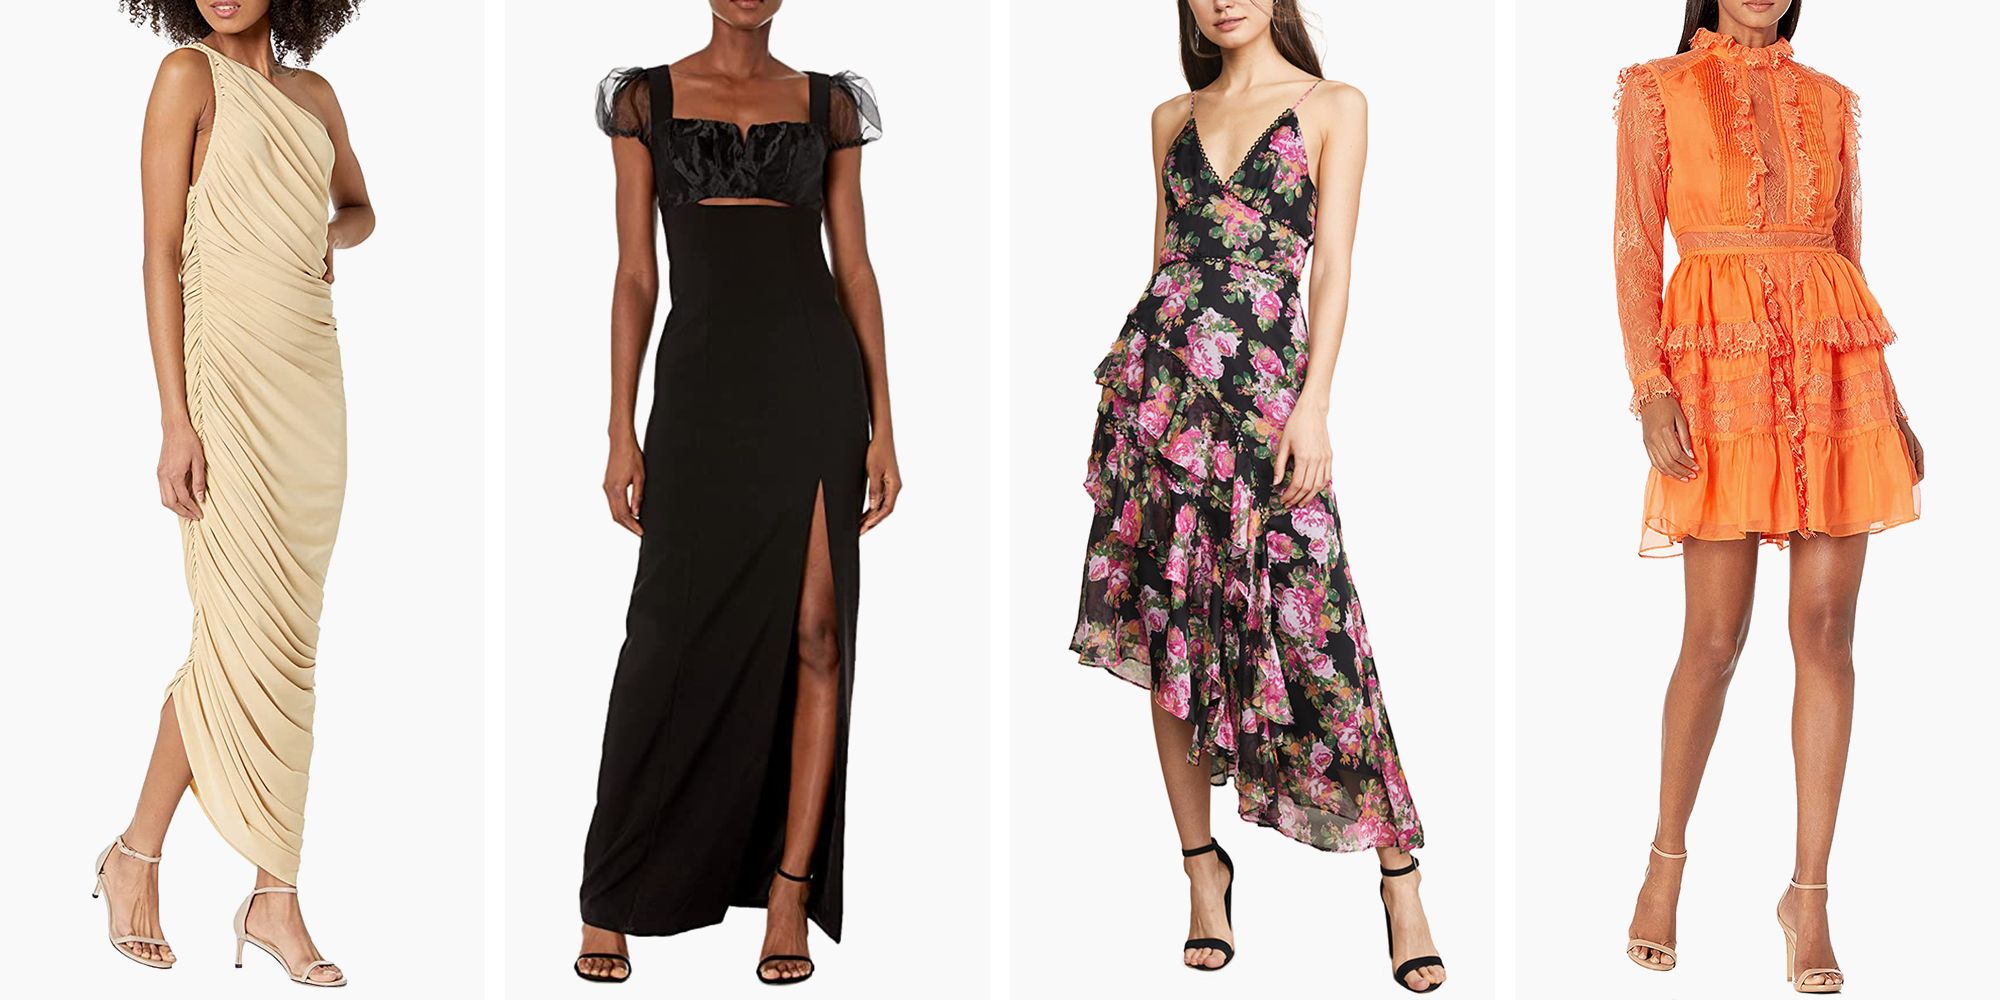 20 Chic Wedding Guest Dresses, Courtesy Of Amazon